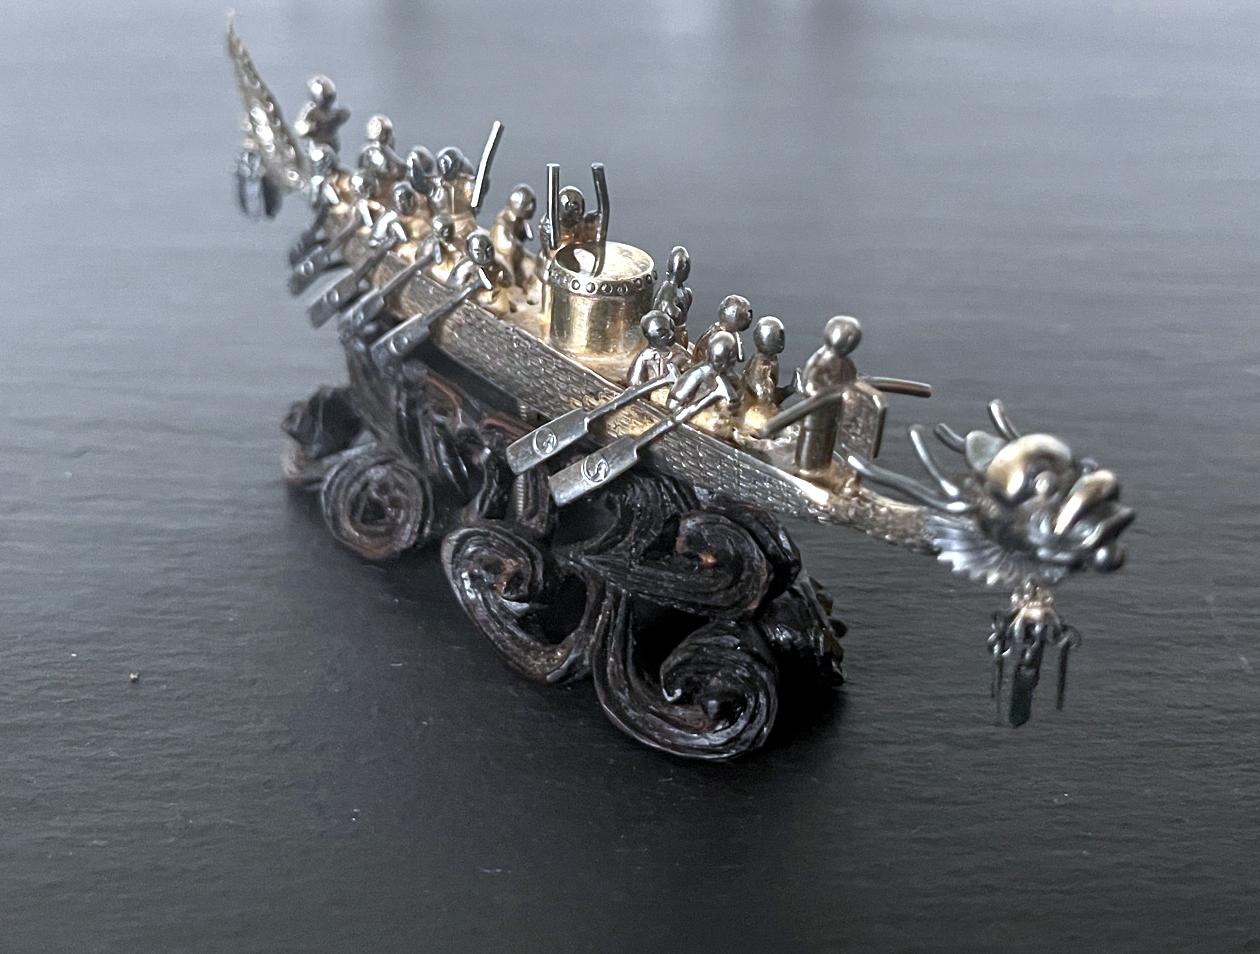 20th Century Chinese Silver Dragon Boat Model on Wood Base